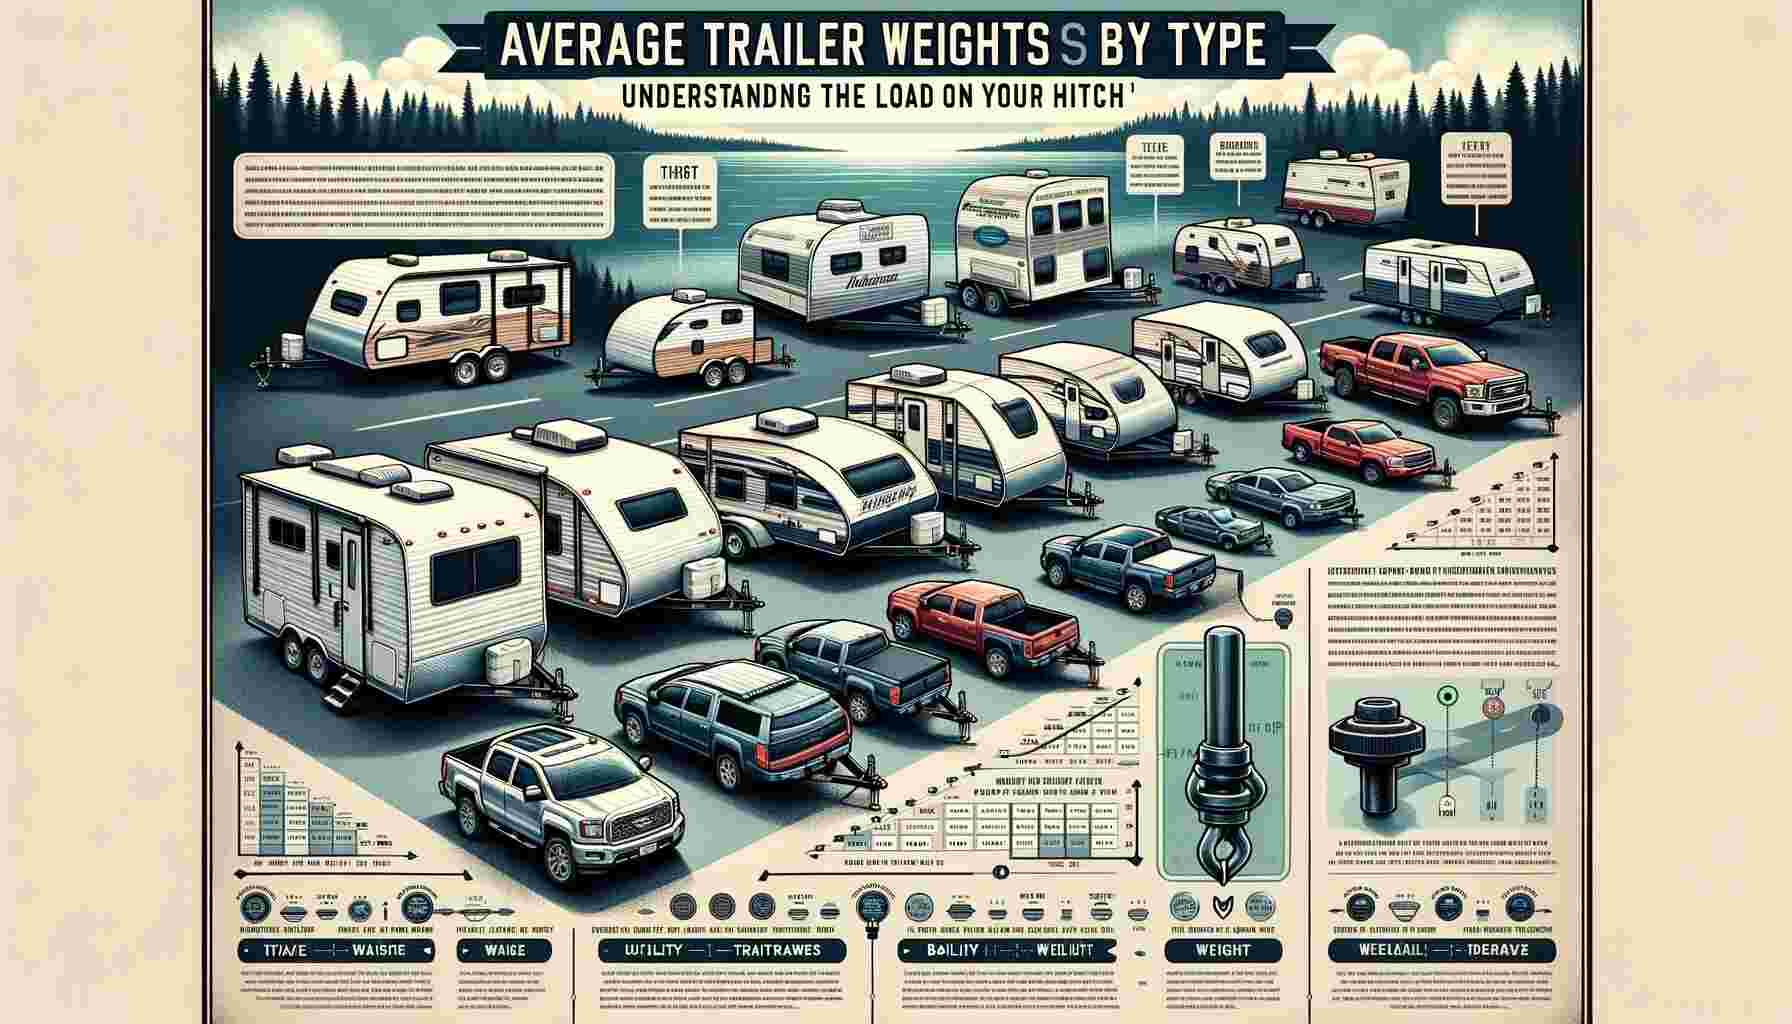 This is the featured image for Average Trailer Weights by Type: Understanding the Load on Your Hitch. It illustrates various types of trailers compared by size and weight, with a hitch for reference and a background symbolizing journey and preparation.